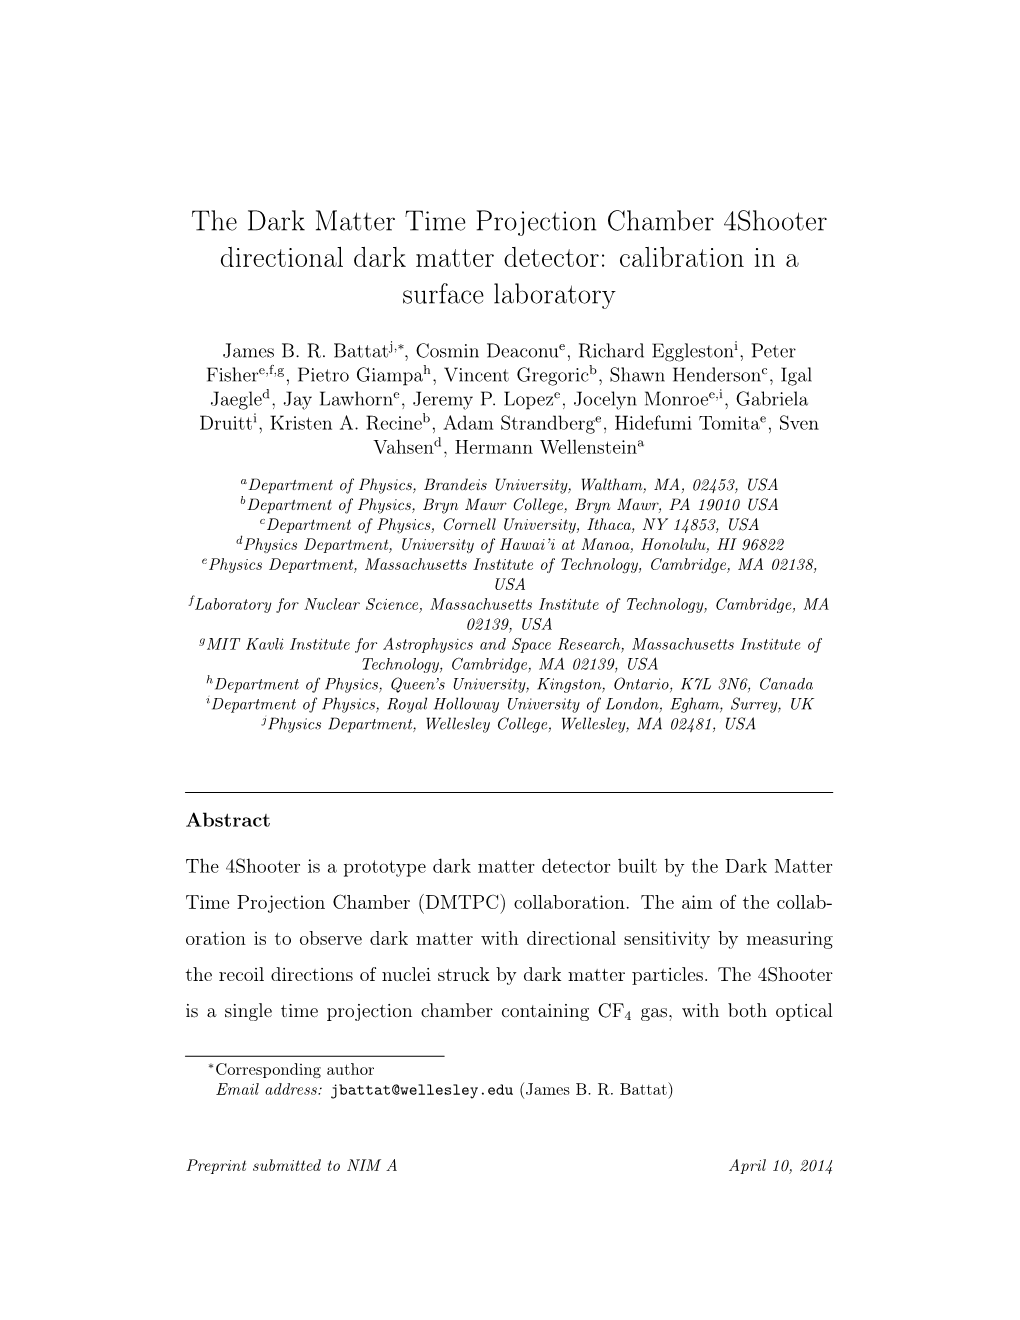 The Dark Matter Time Projection Chamber 4Shooter Directional Dark Matter Detector: Calibration in a Surface Laboratory